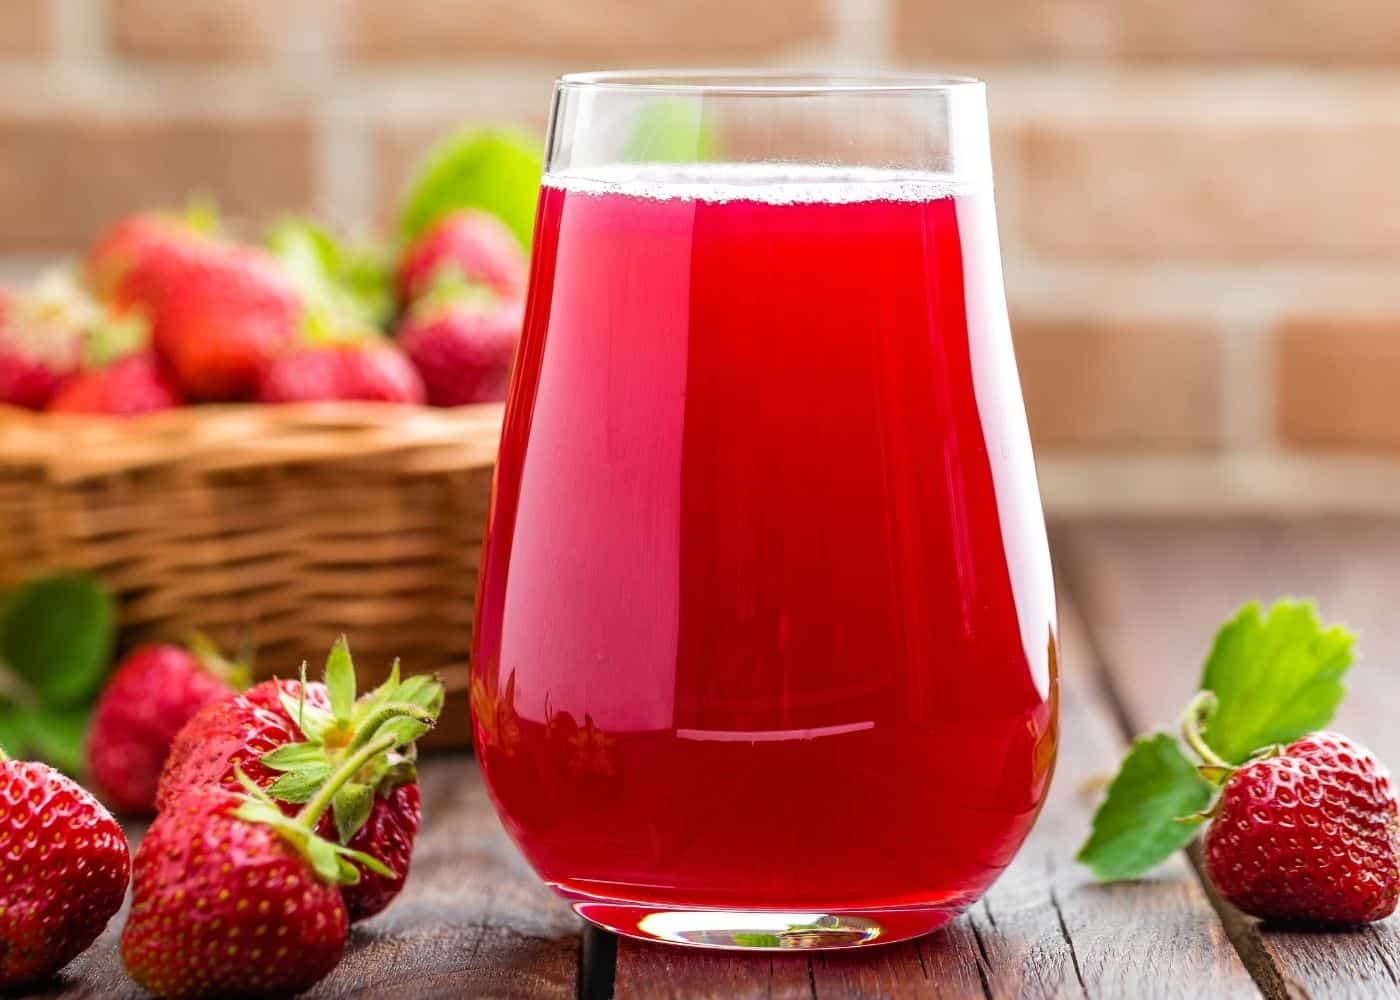 How to Make Strawberry Juice (With and Without Juicer) - Alphafoodie